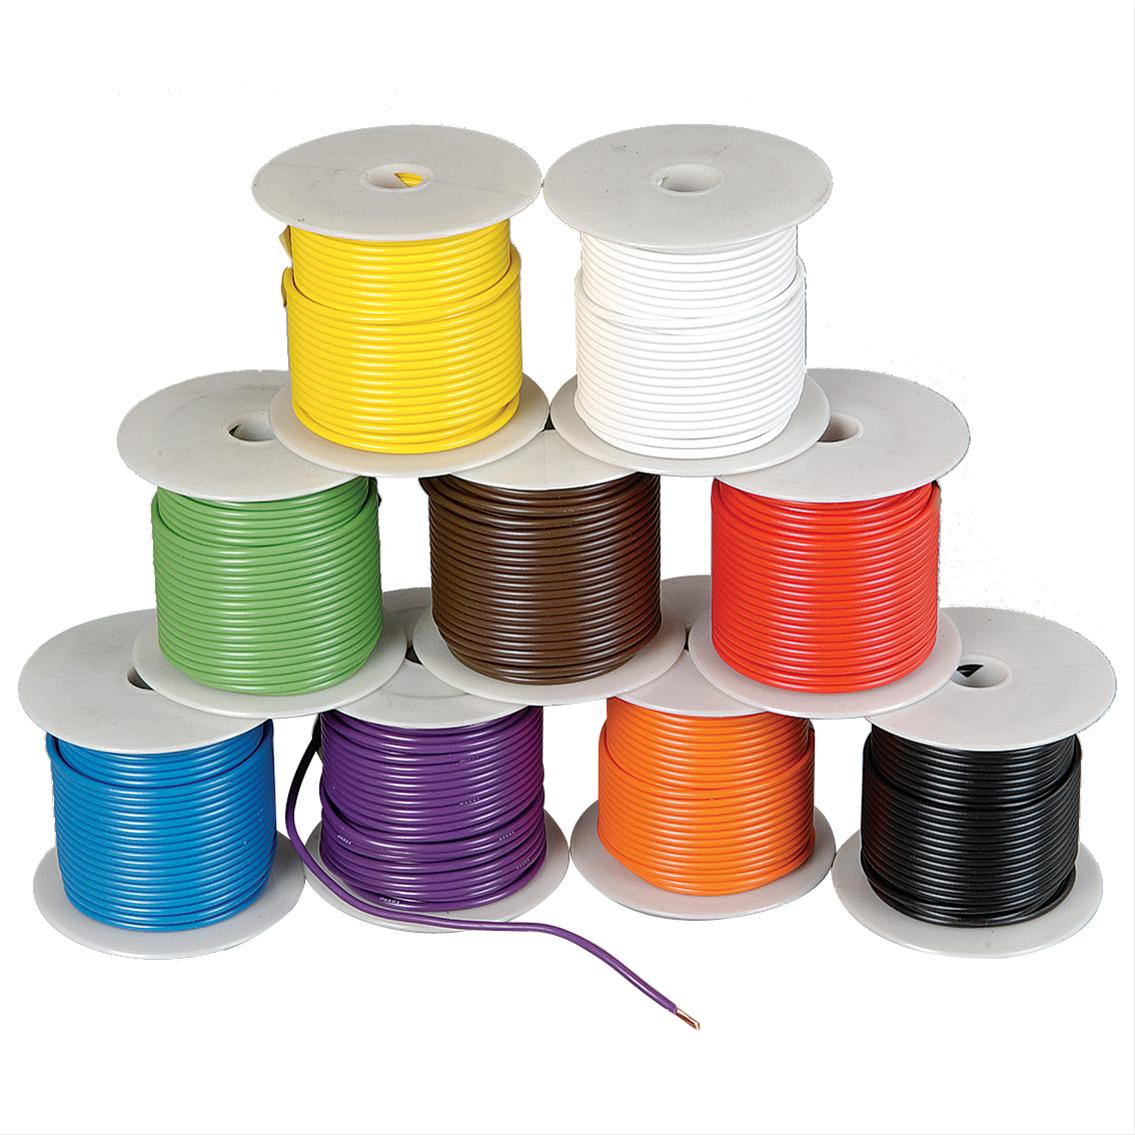 Rolls of electronic grade wire